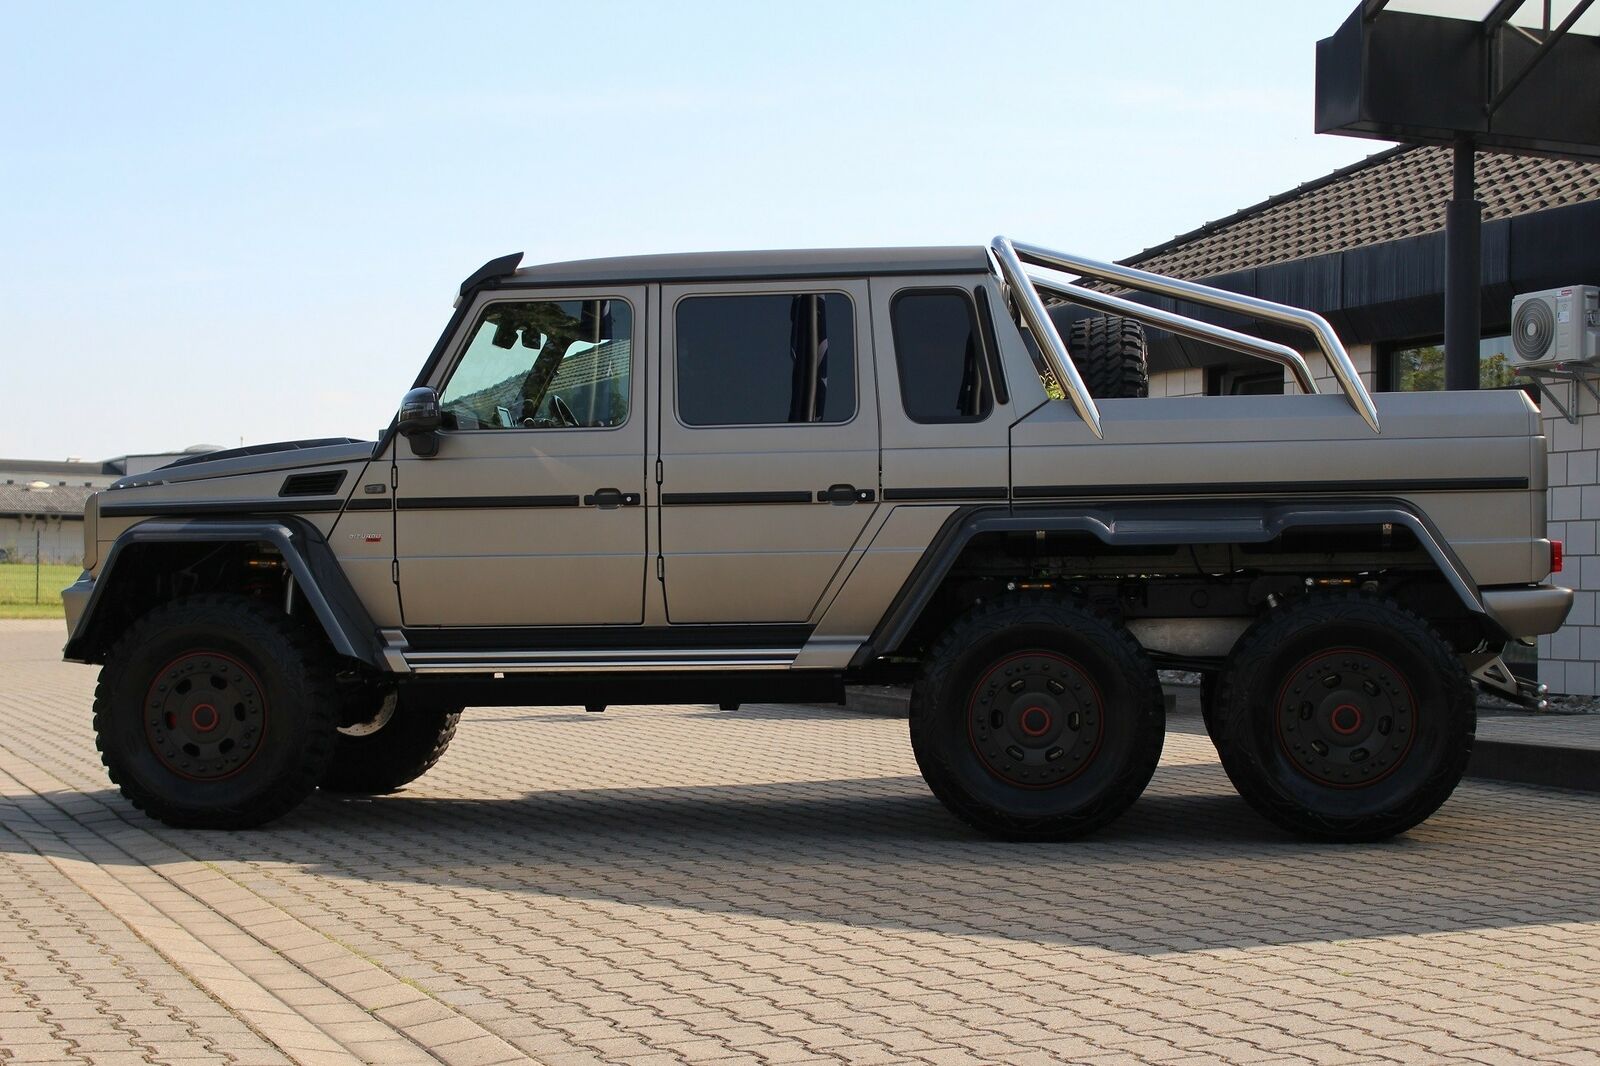 Mercedes Benz G 63 Amg 6x6 Brabus 700 Autohaus Ansawi Luxury Pulse Cars Germany For Sale On Luxurypulse